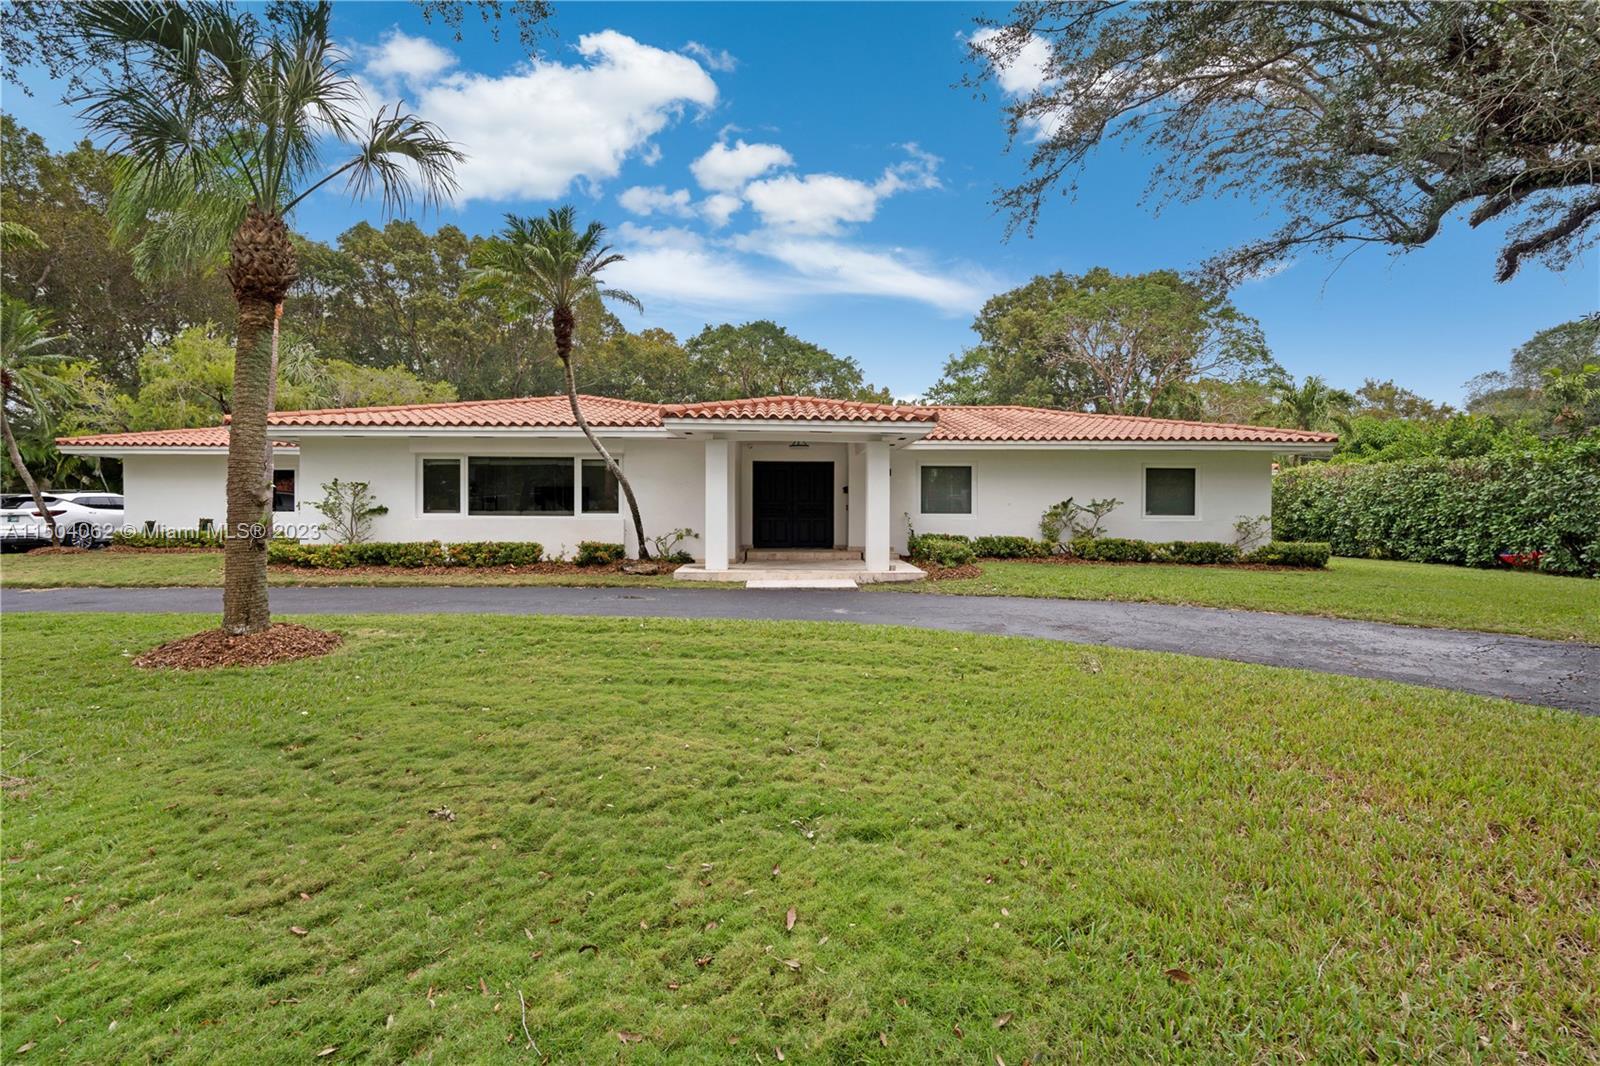 Photo of 1211 Hardee Rd in Coral Gables, FL